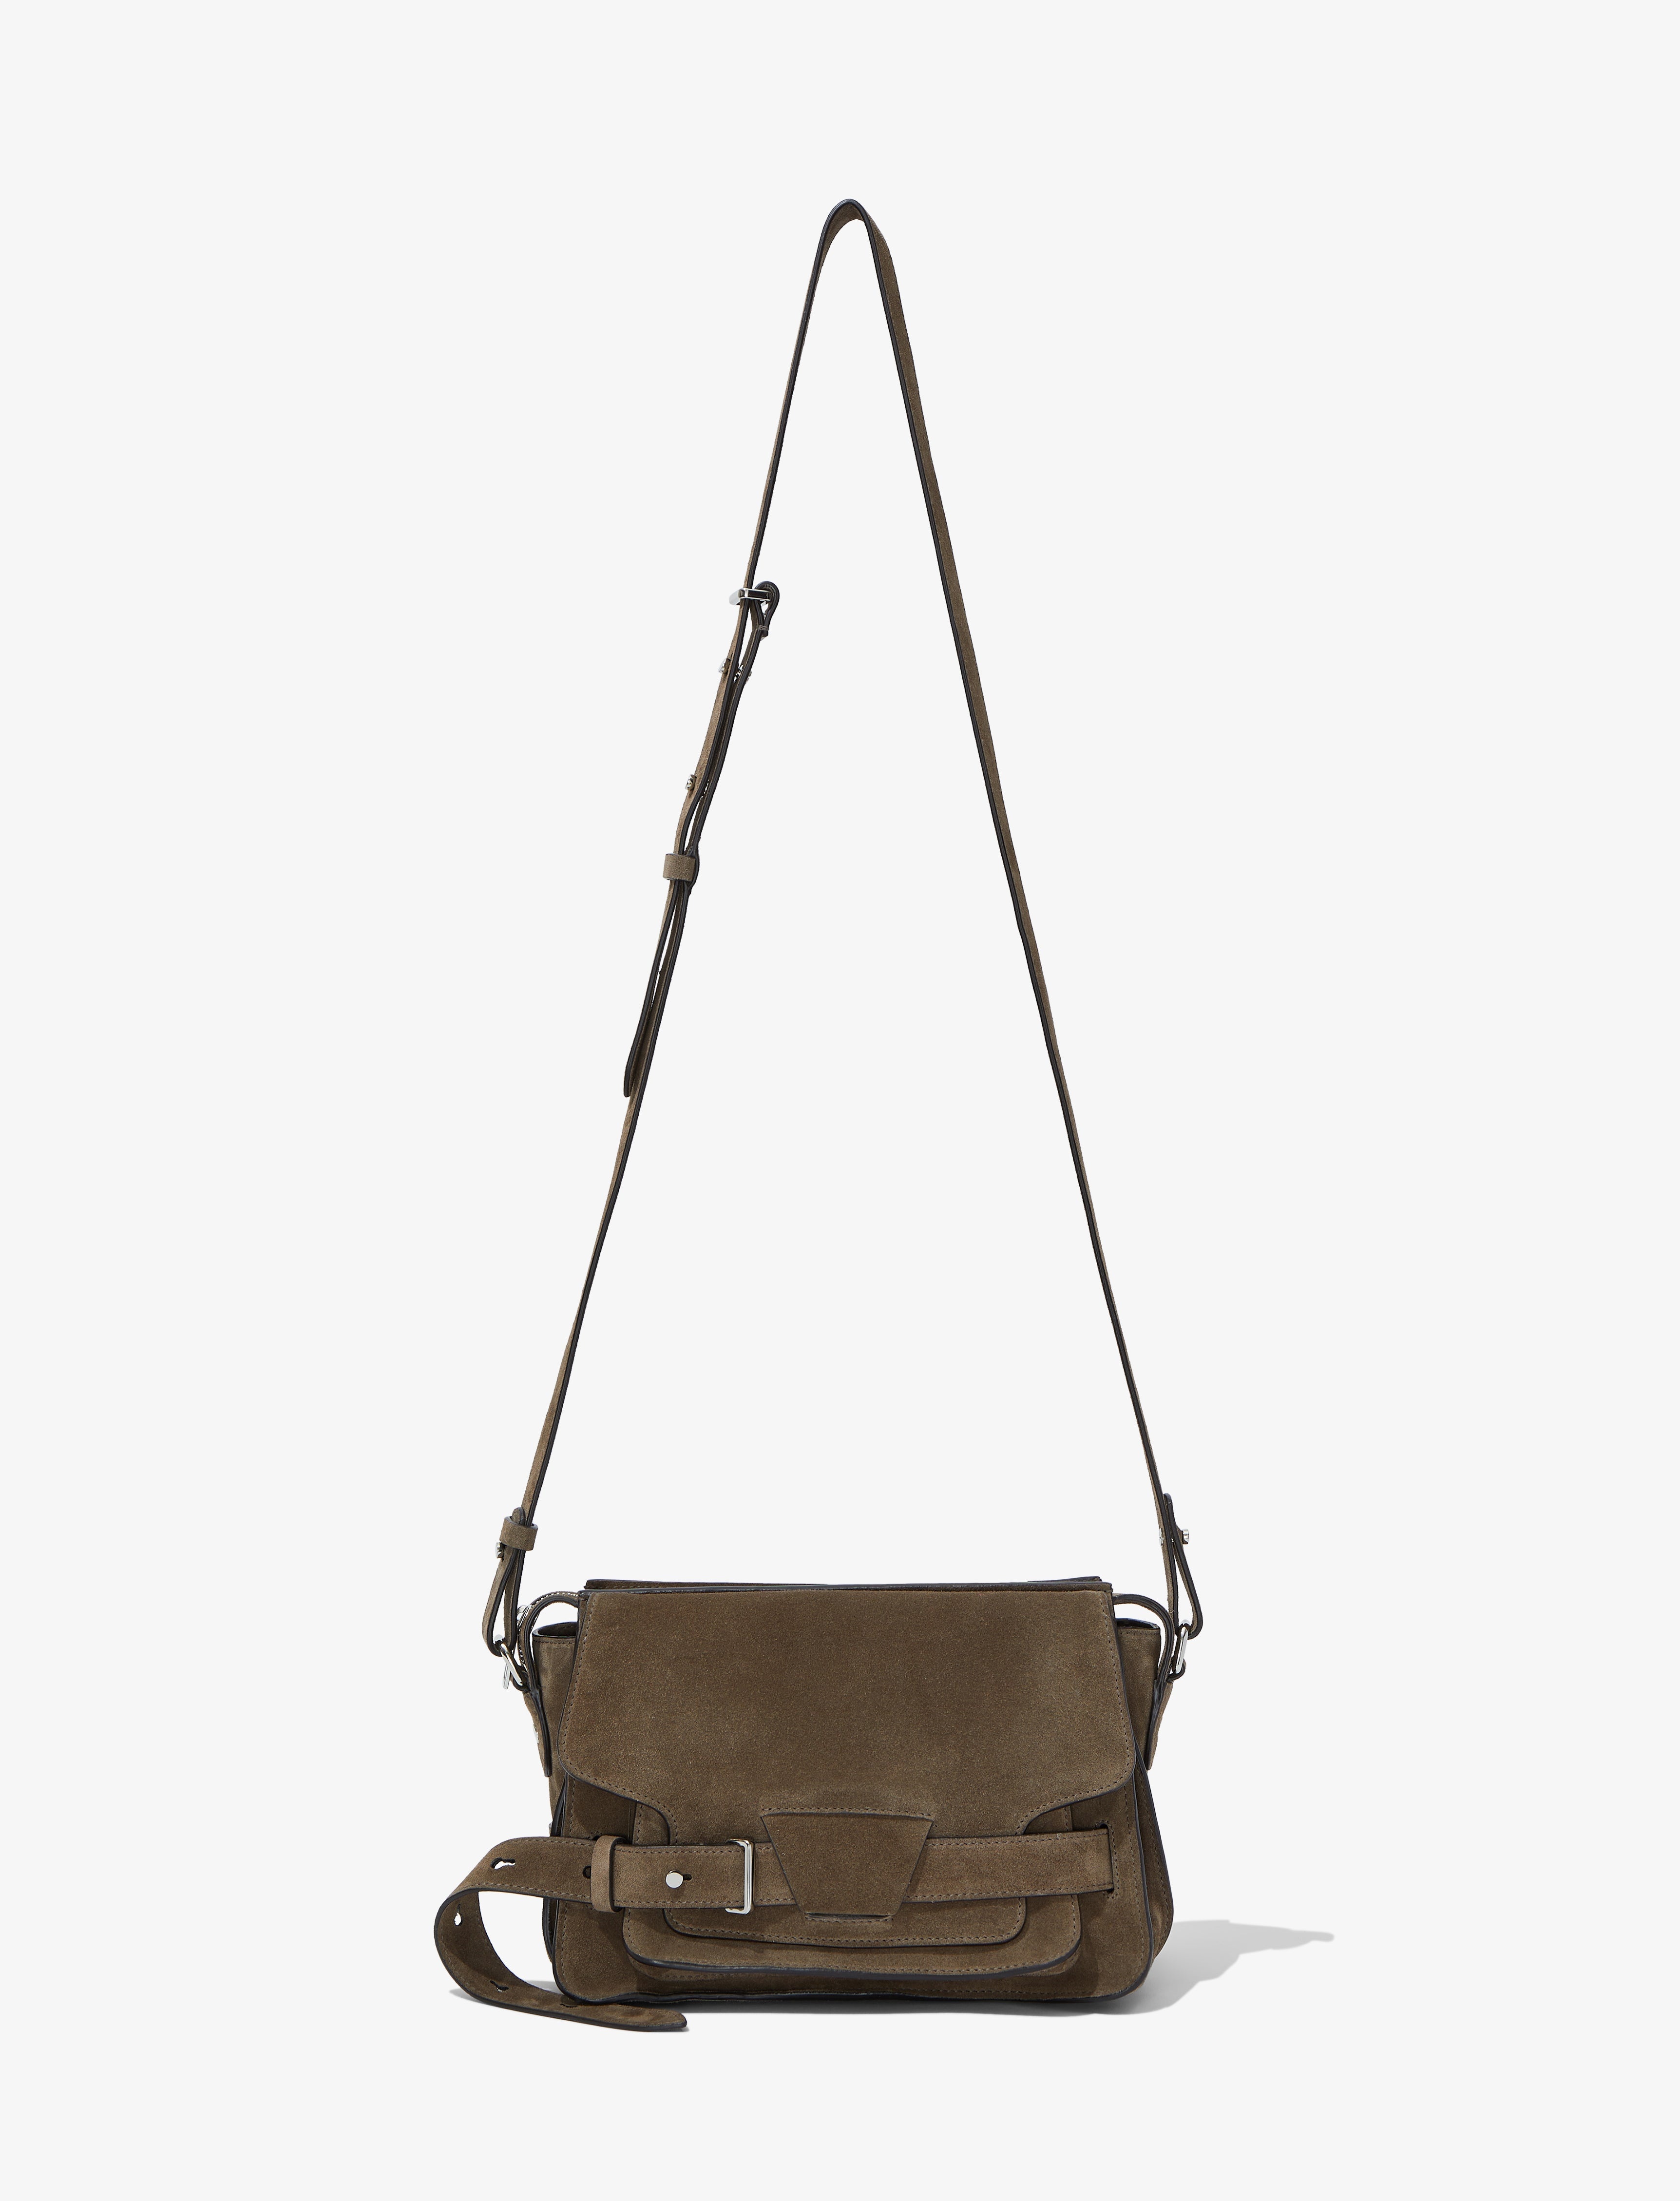 Beacon Saddle Bag in Suede - 7